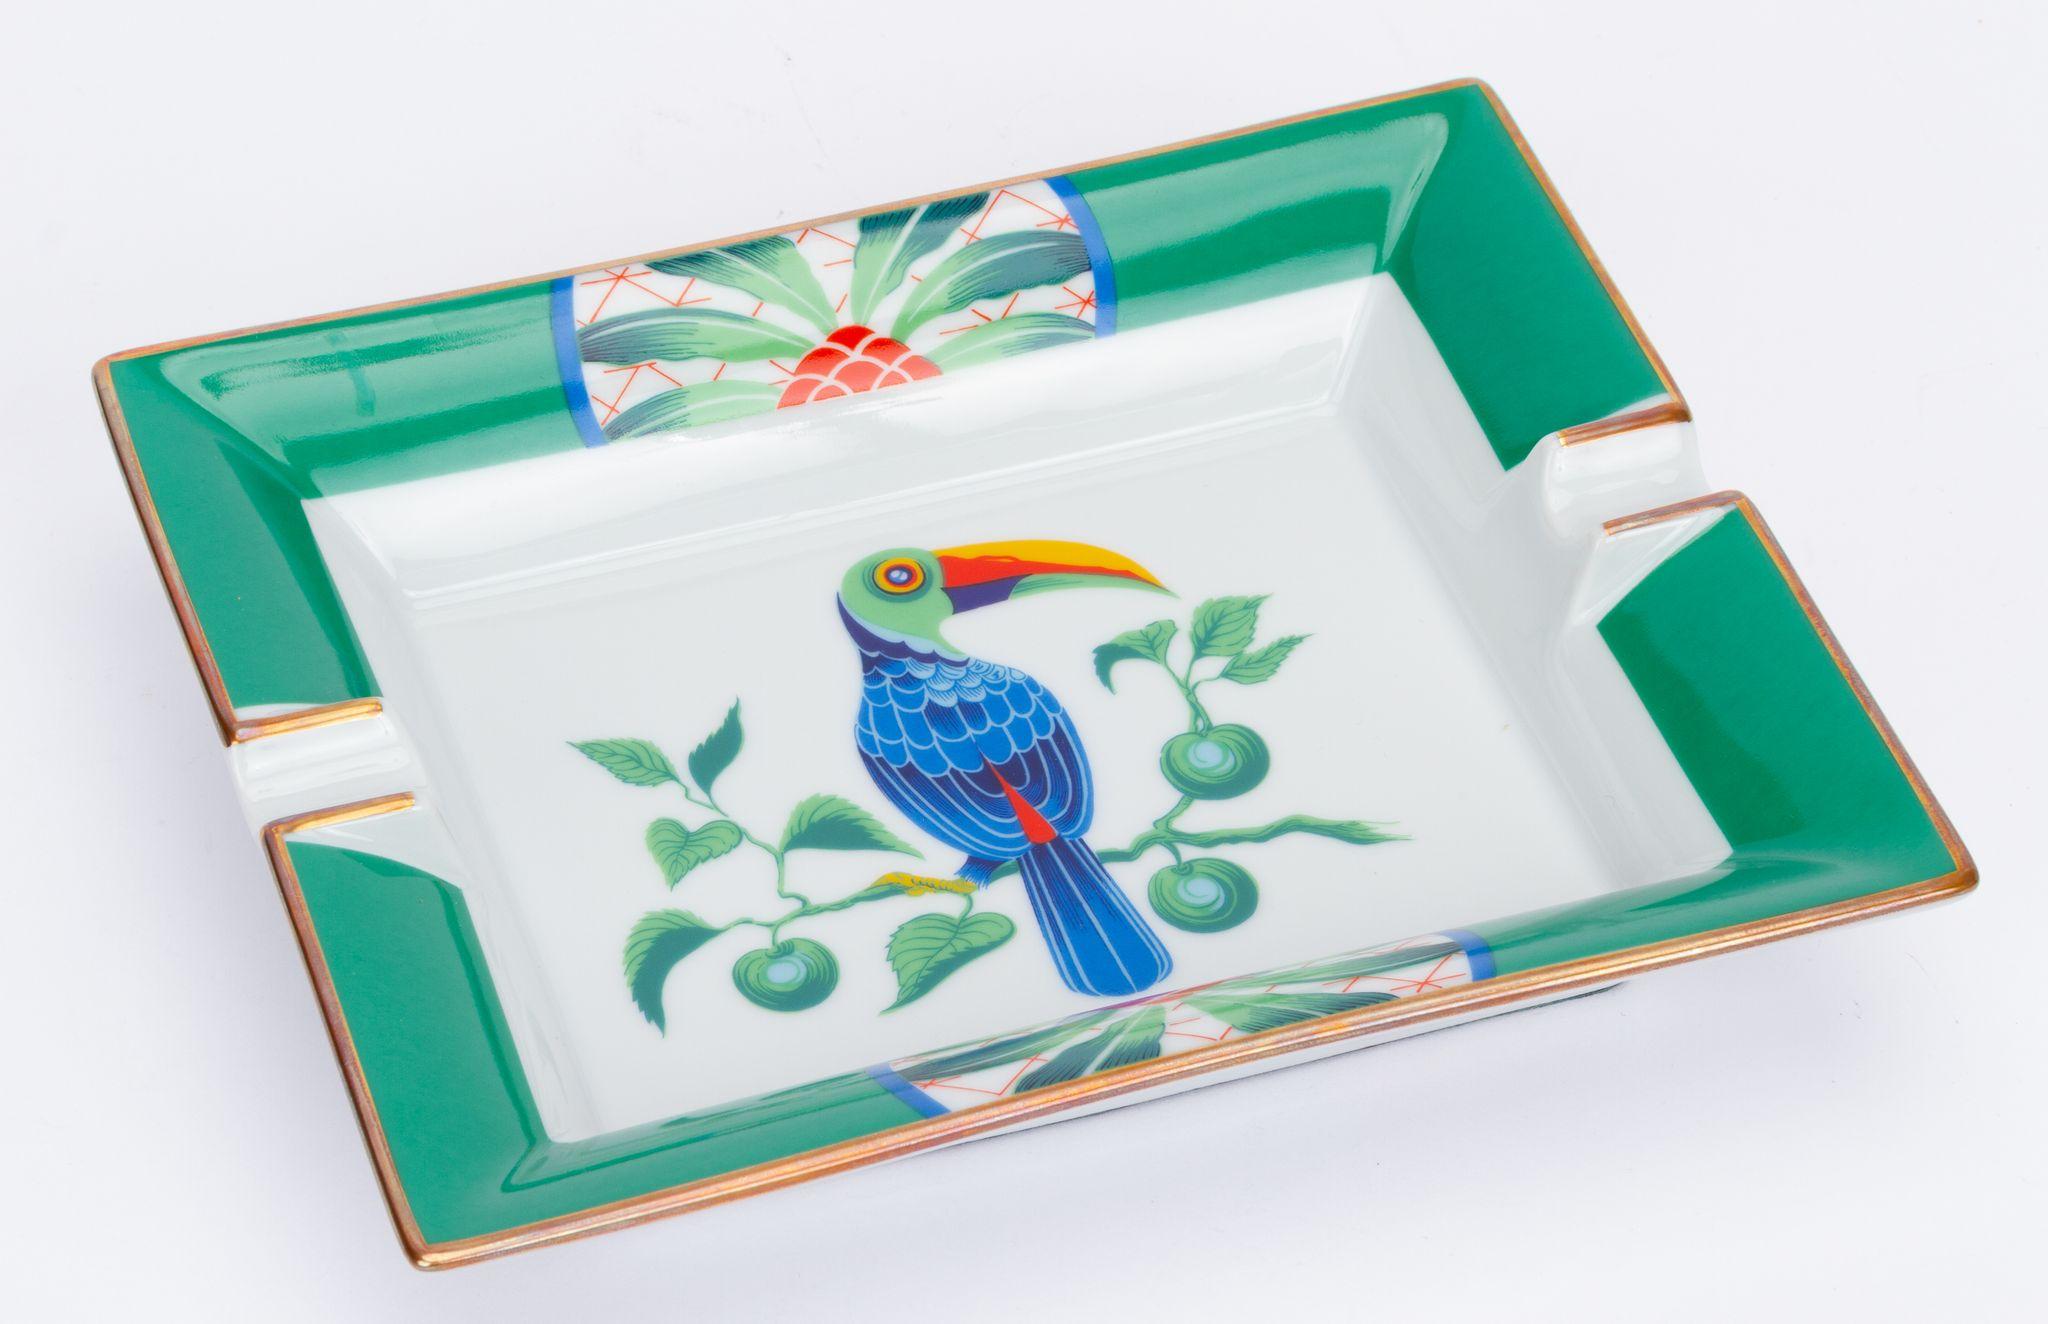 Hermès vintage ashtray in green with the image of a Toucan in the center of it. The piece is in excellent condition and comes with the original box.